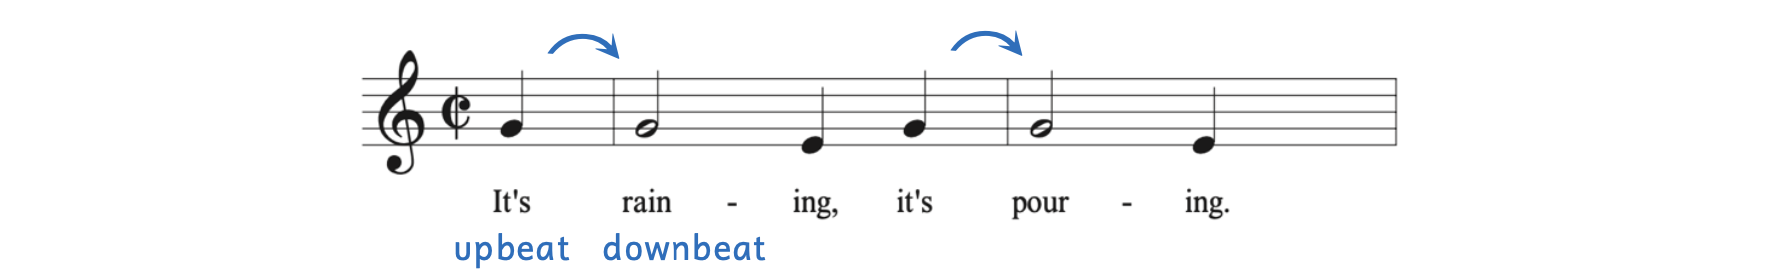 Arrows showing how upbeats lead into the downbeats. "It's" is on the upbeat and leads into "rain," which falls on the downbeat. Similarly, "it's" at the end of the first full measure leads into "pour," which falls on the downbeat of the next measure.